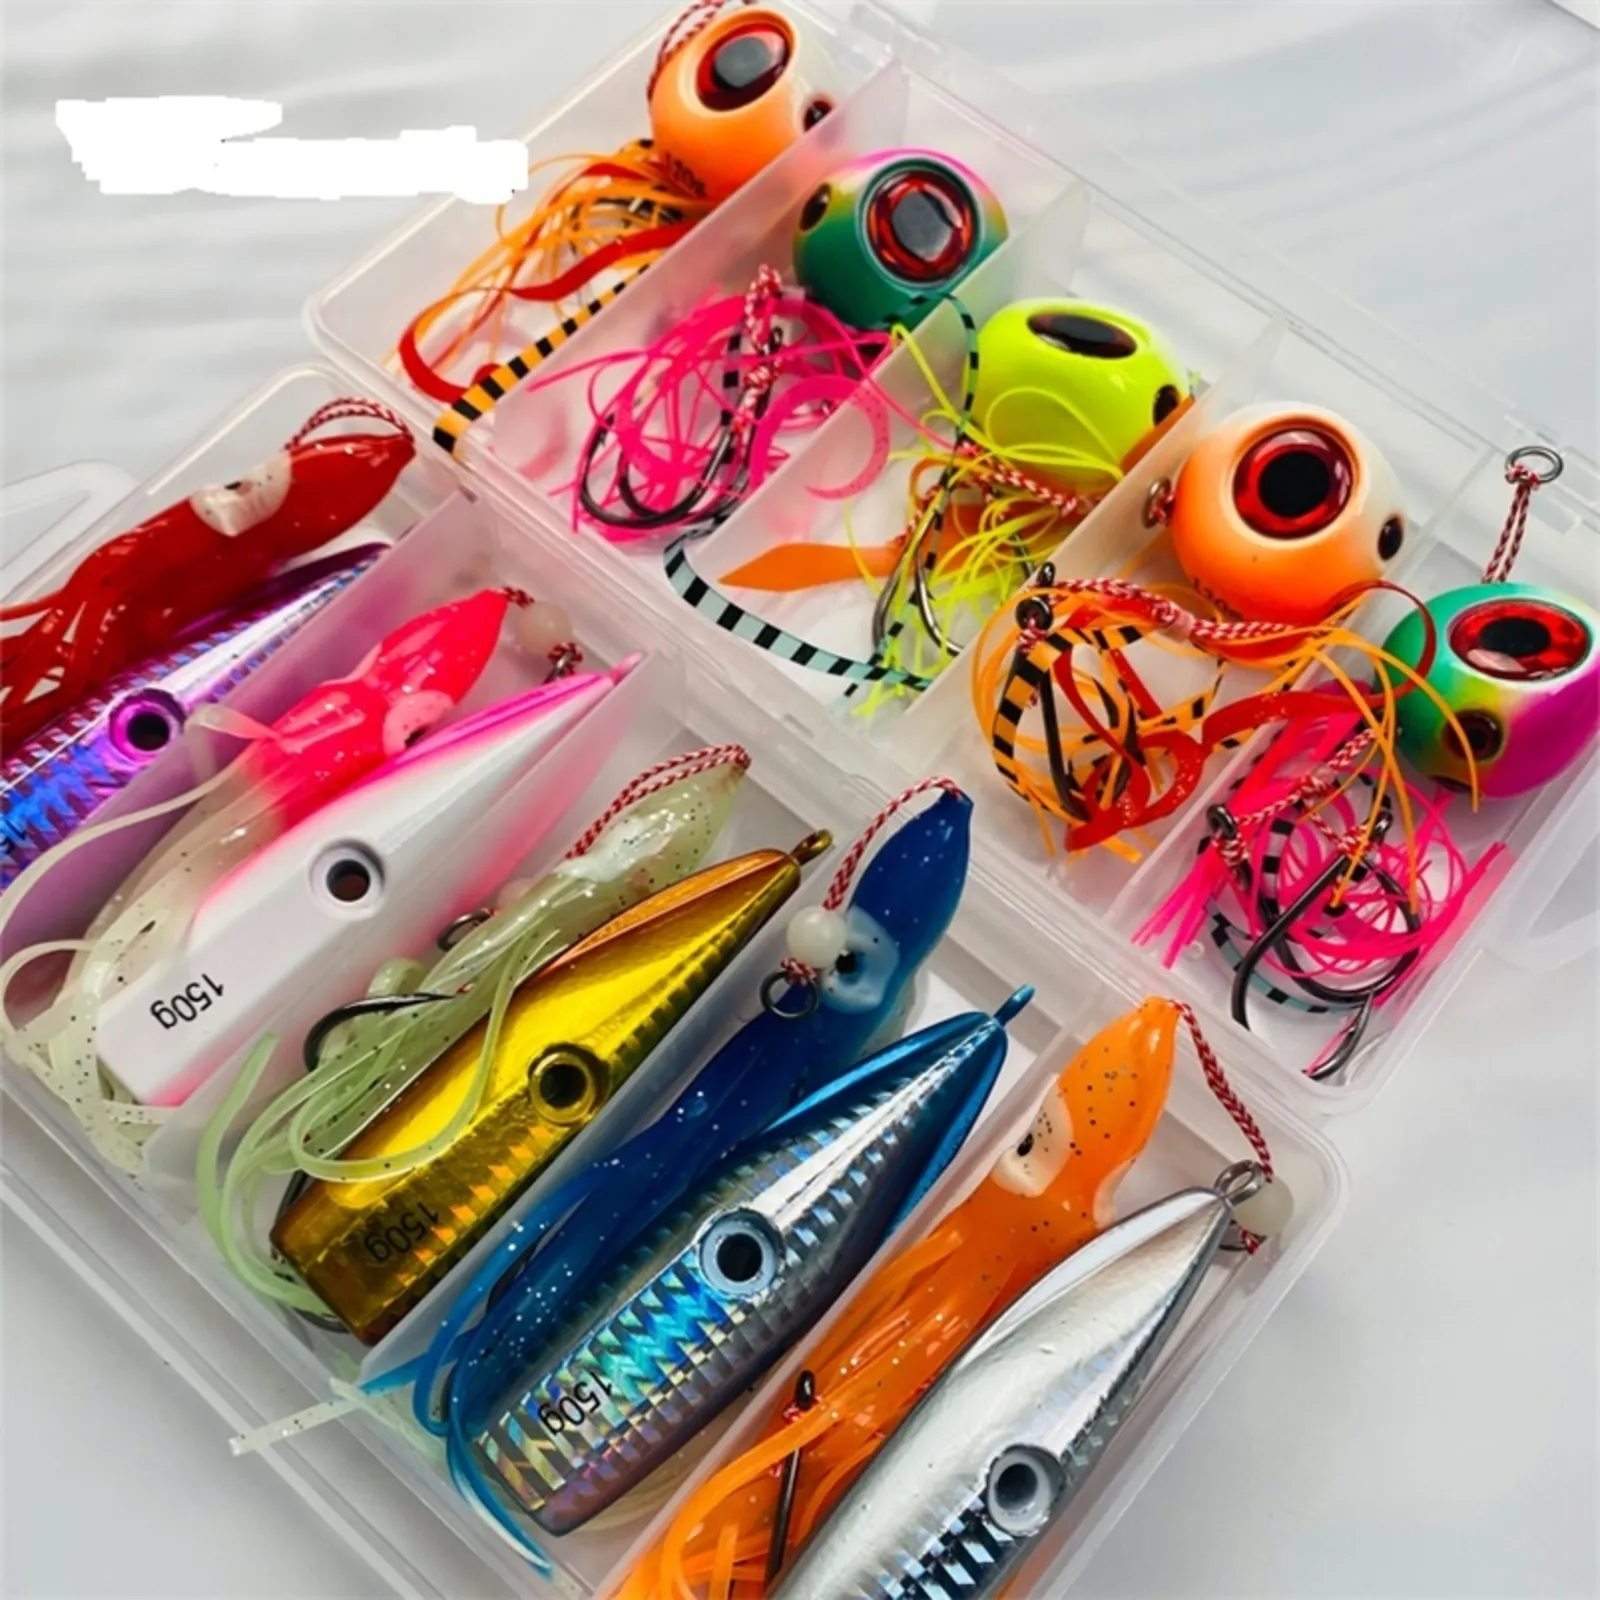 Fishing Tackle 5pcs/Set 7cm Squid Jigs With 4# Hook Fishing Squid